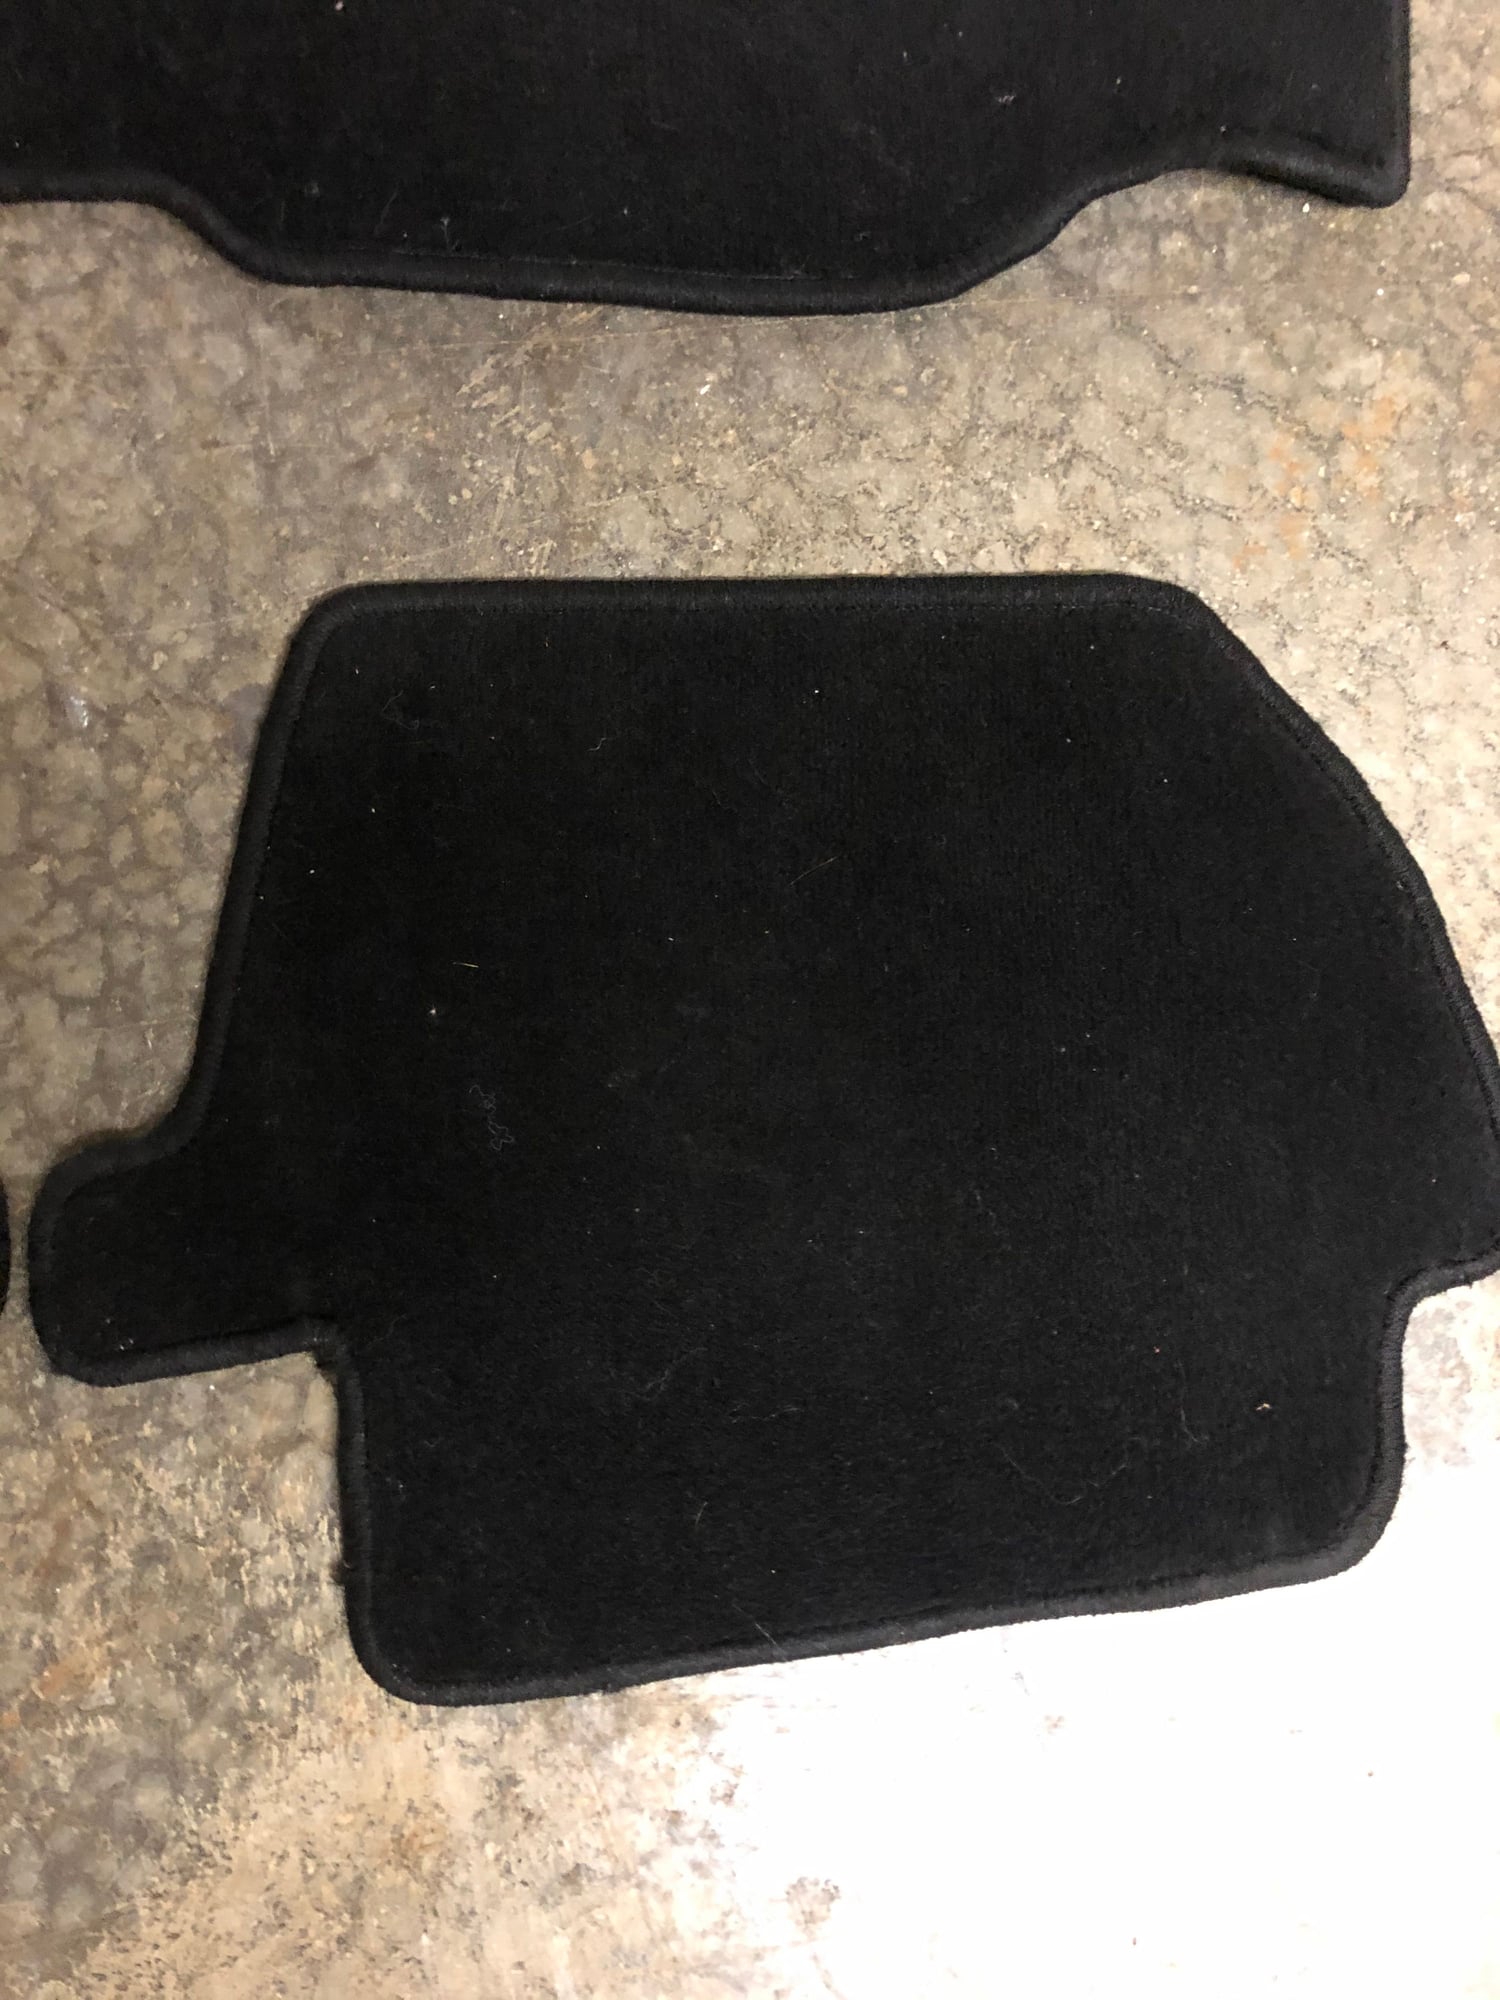 Interior/Upholstery - 996 Cab Floor Mats Black - Used - 2002 to 2004 Porsche 911 - Maryville, TN 37803, United States